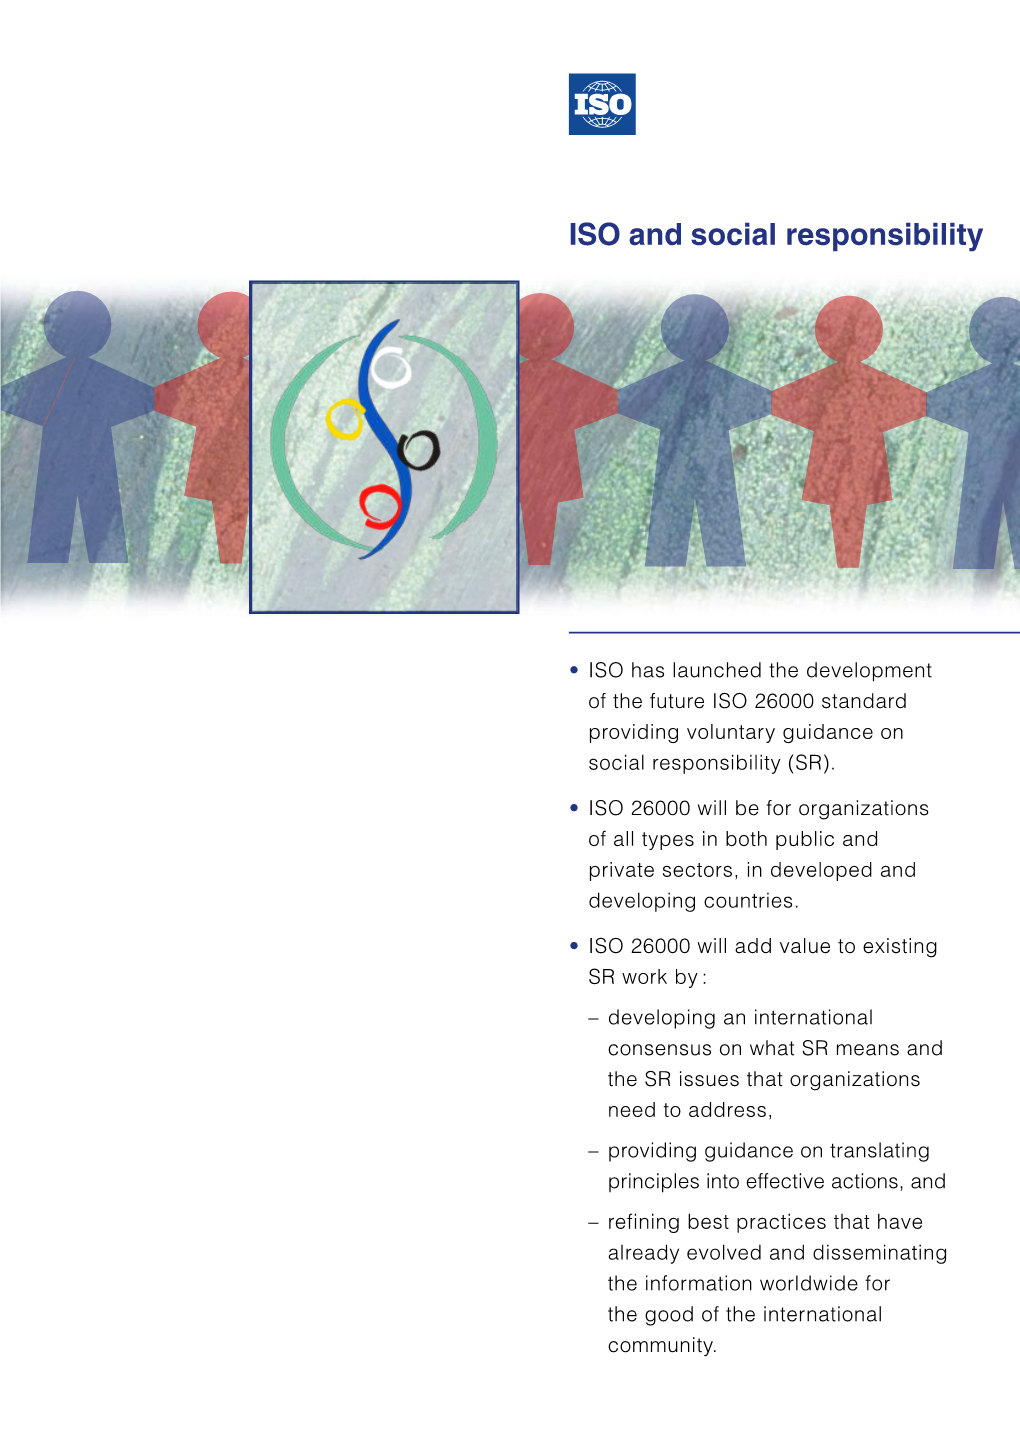 ISO and Social Responsibility